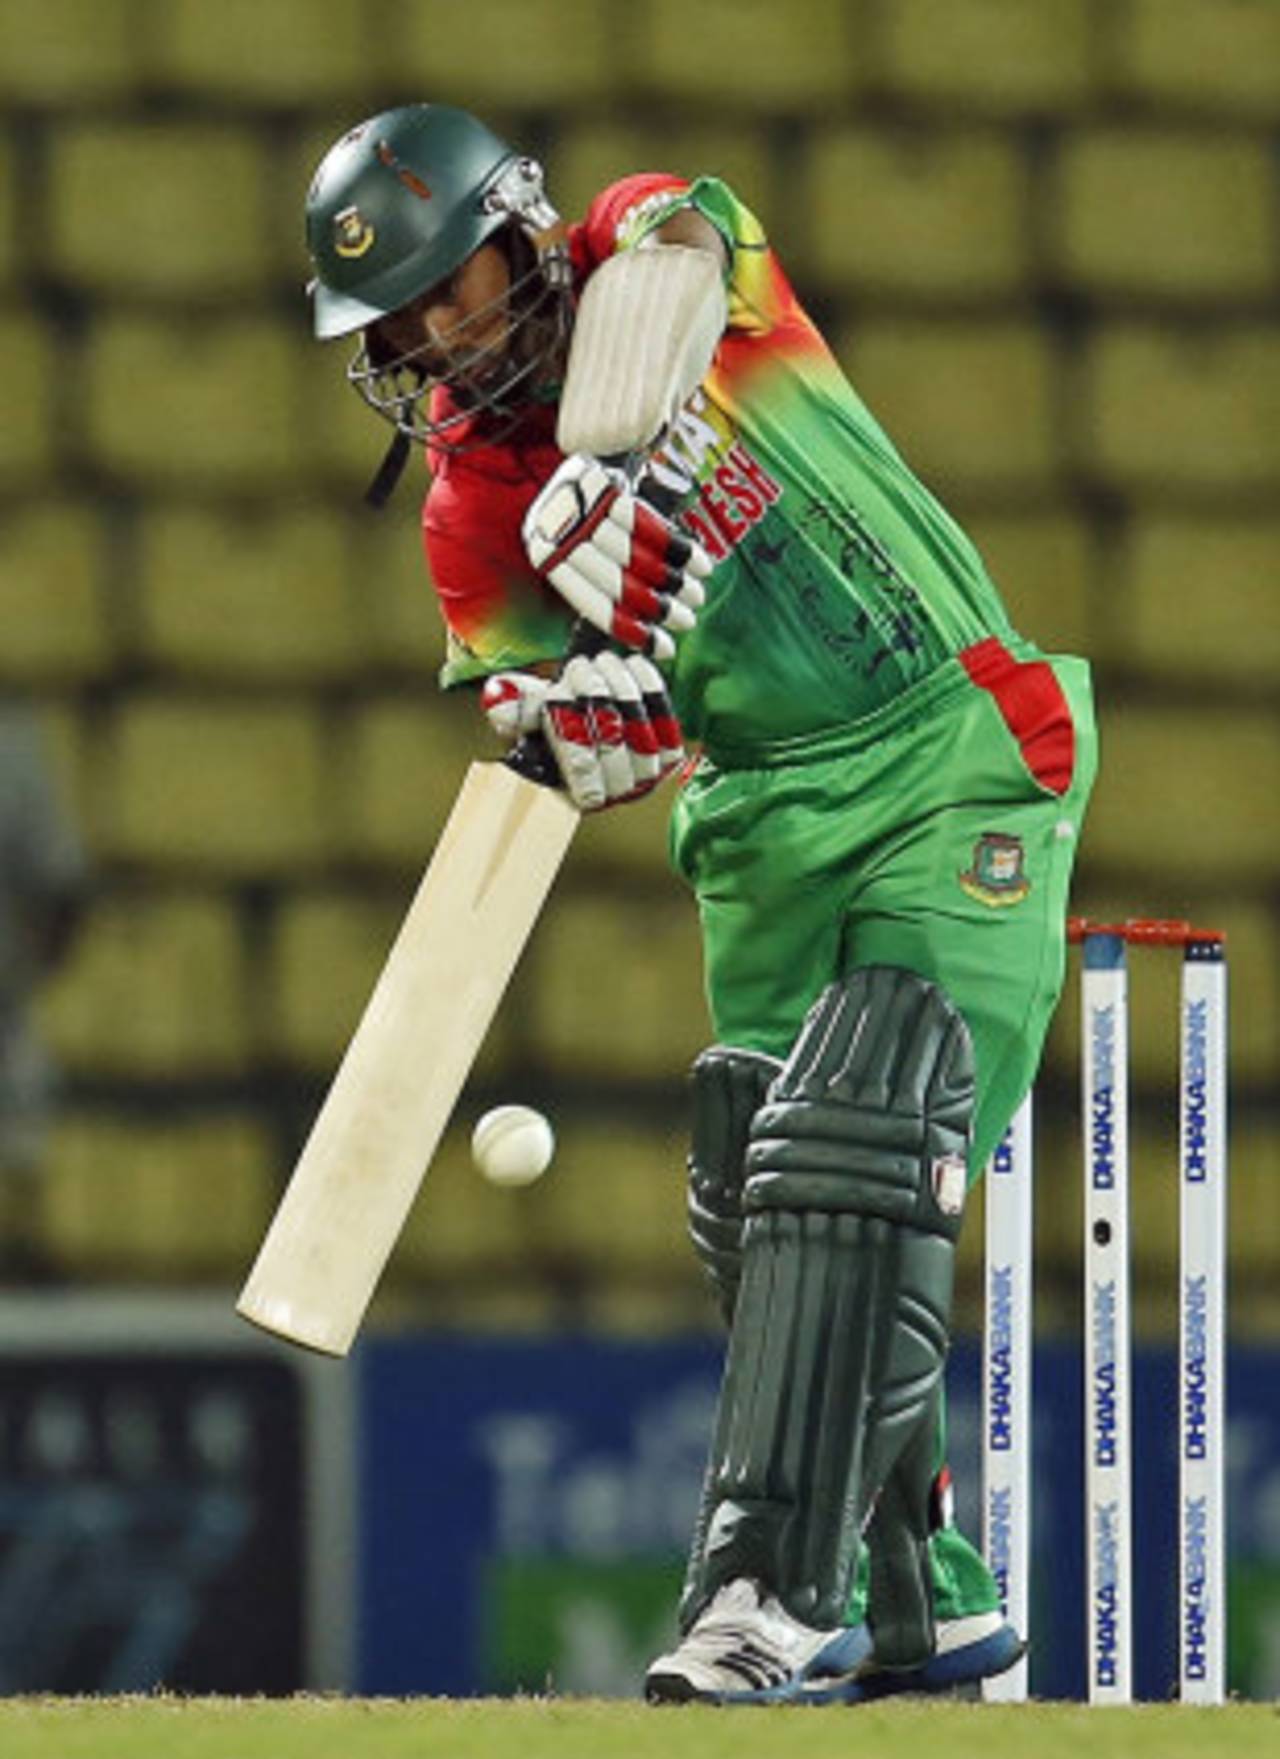 Plenty is expected from Mohammad Ashraful at the top of the order, especially in the absence of the injured Tamim Iqbal&nbsp;&nbsp;&bull;&nbsp;&nbsp;Associated Press